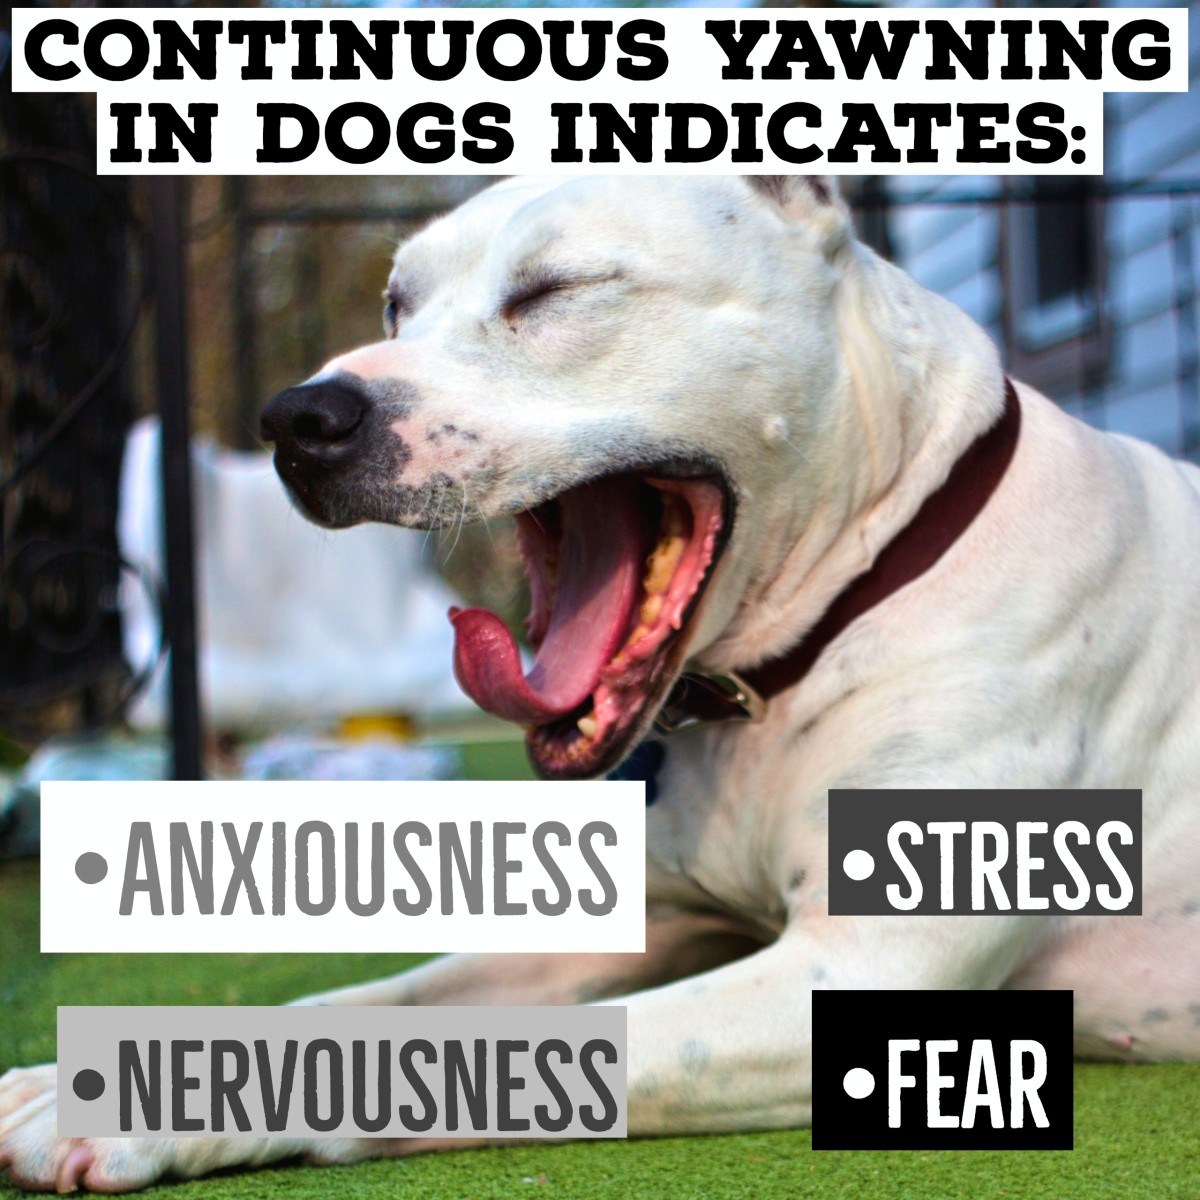 Licking and yawning in dogs is a sign of either nausea or severe stress.